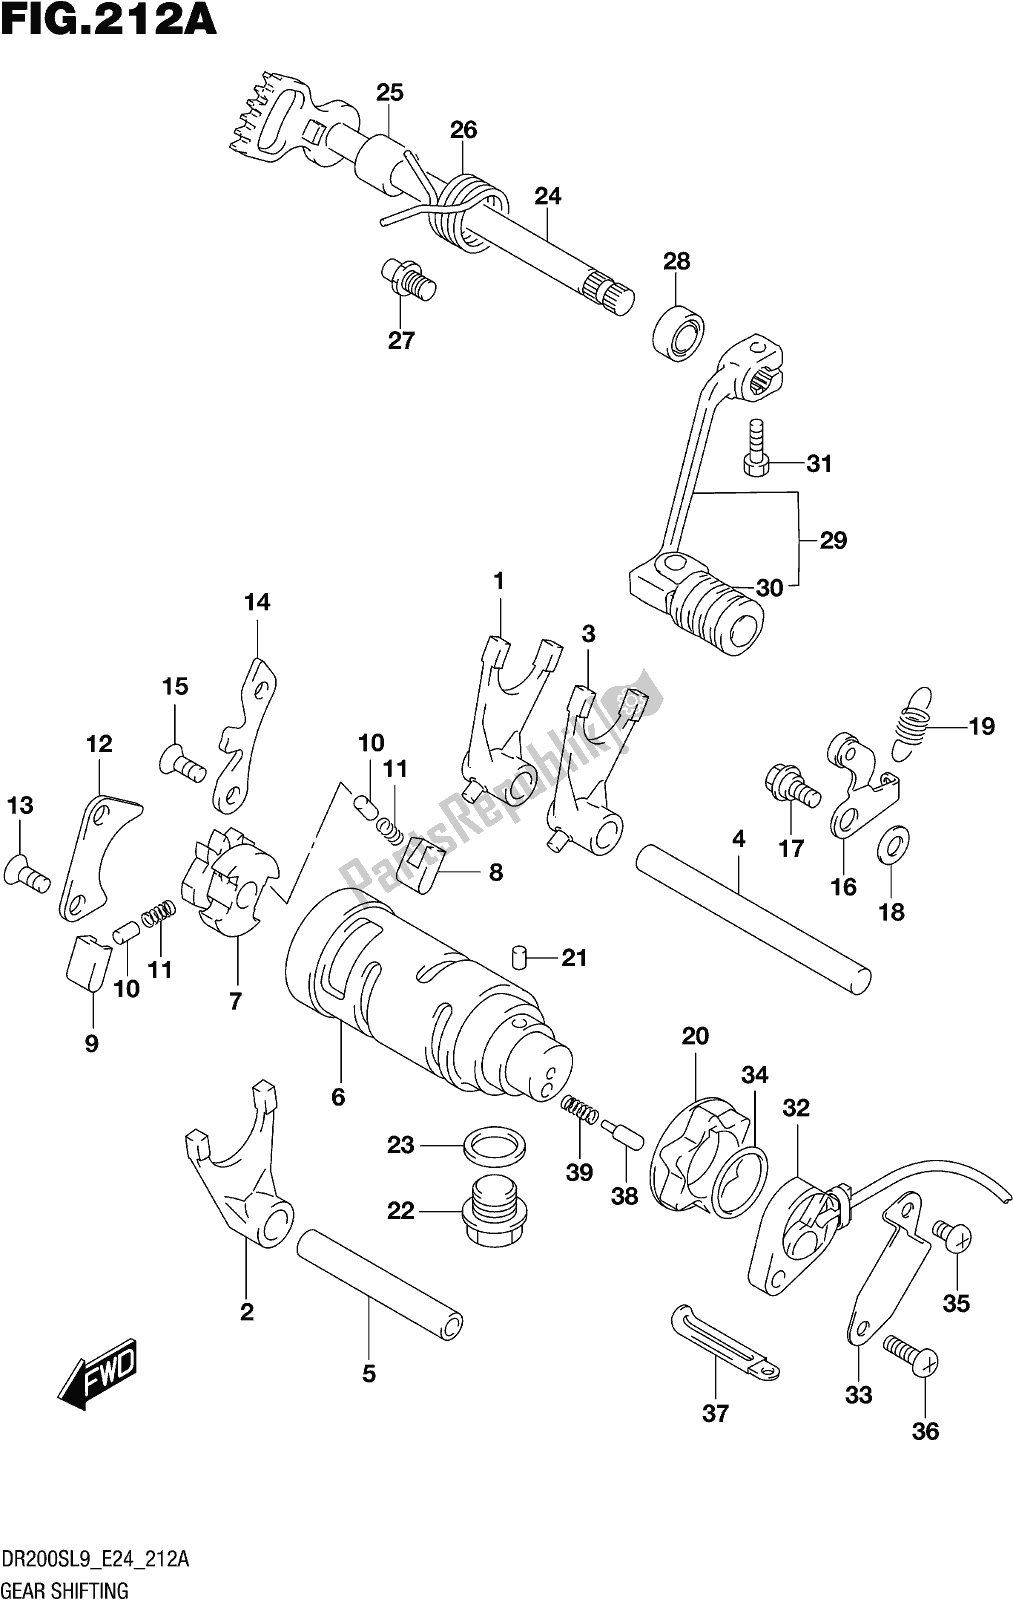 All parts for the Fig. 212a Gear Shifting of the Suzuki DR 200S 2019